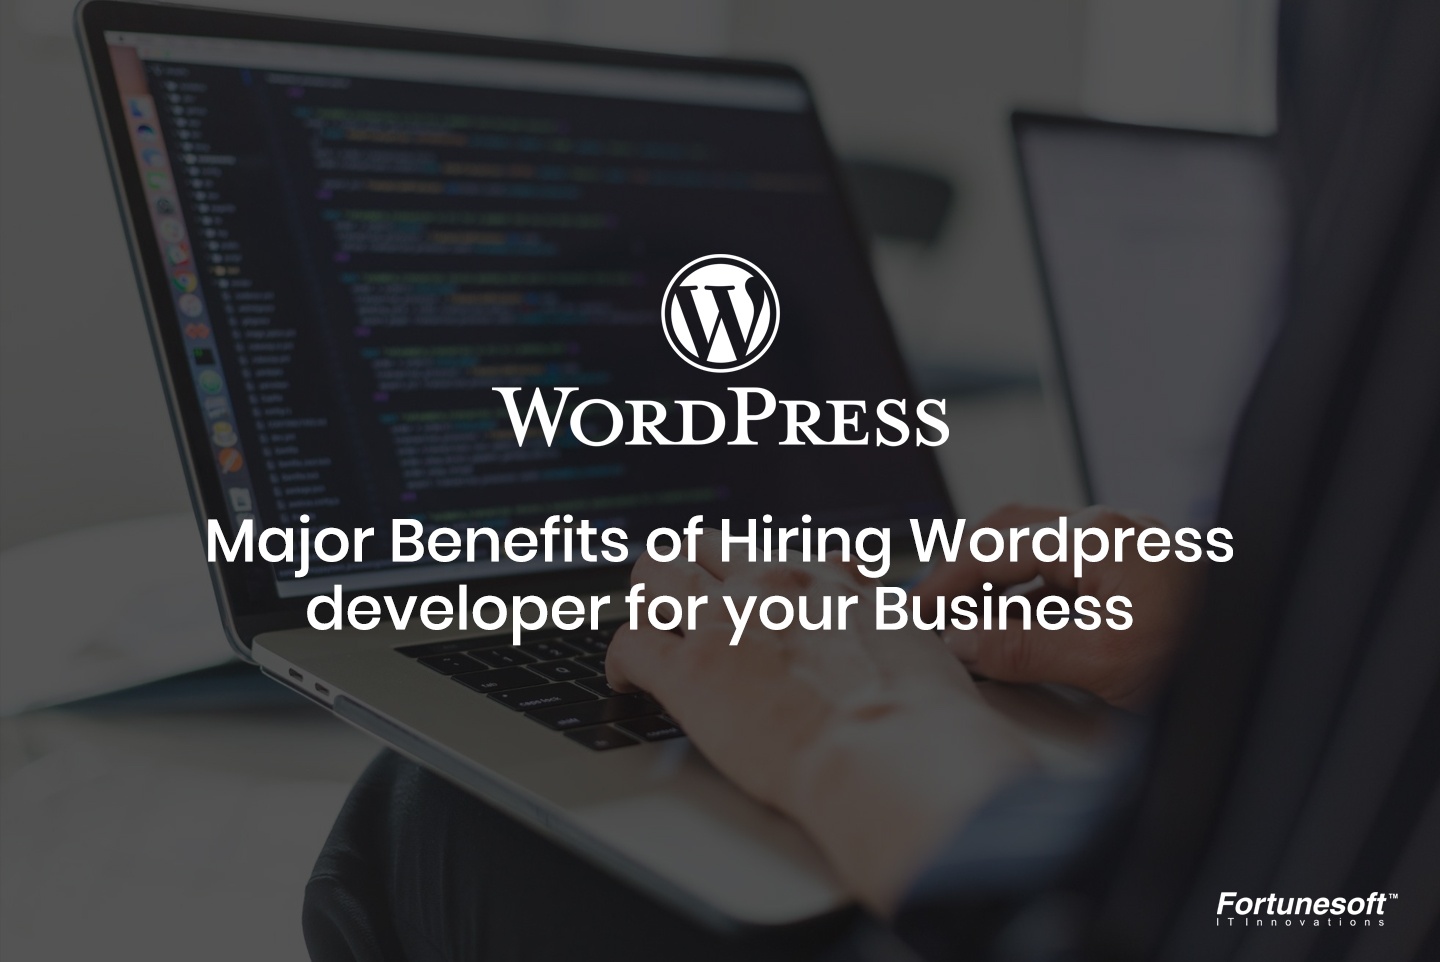 Fortunesoft IT Innovations, Inc. Wordpress News: Why to hire Wordpress developers for your business